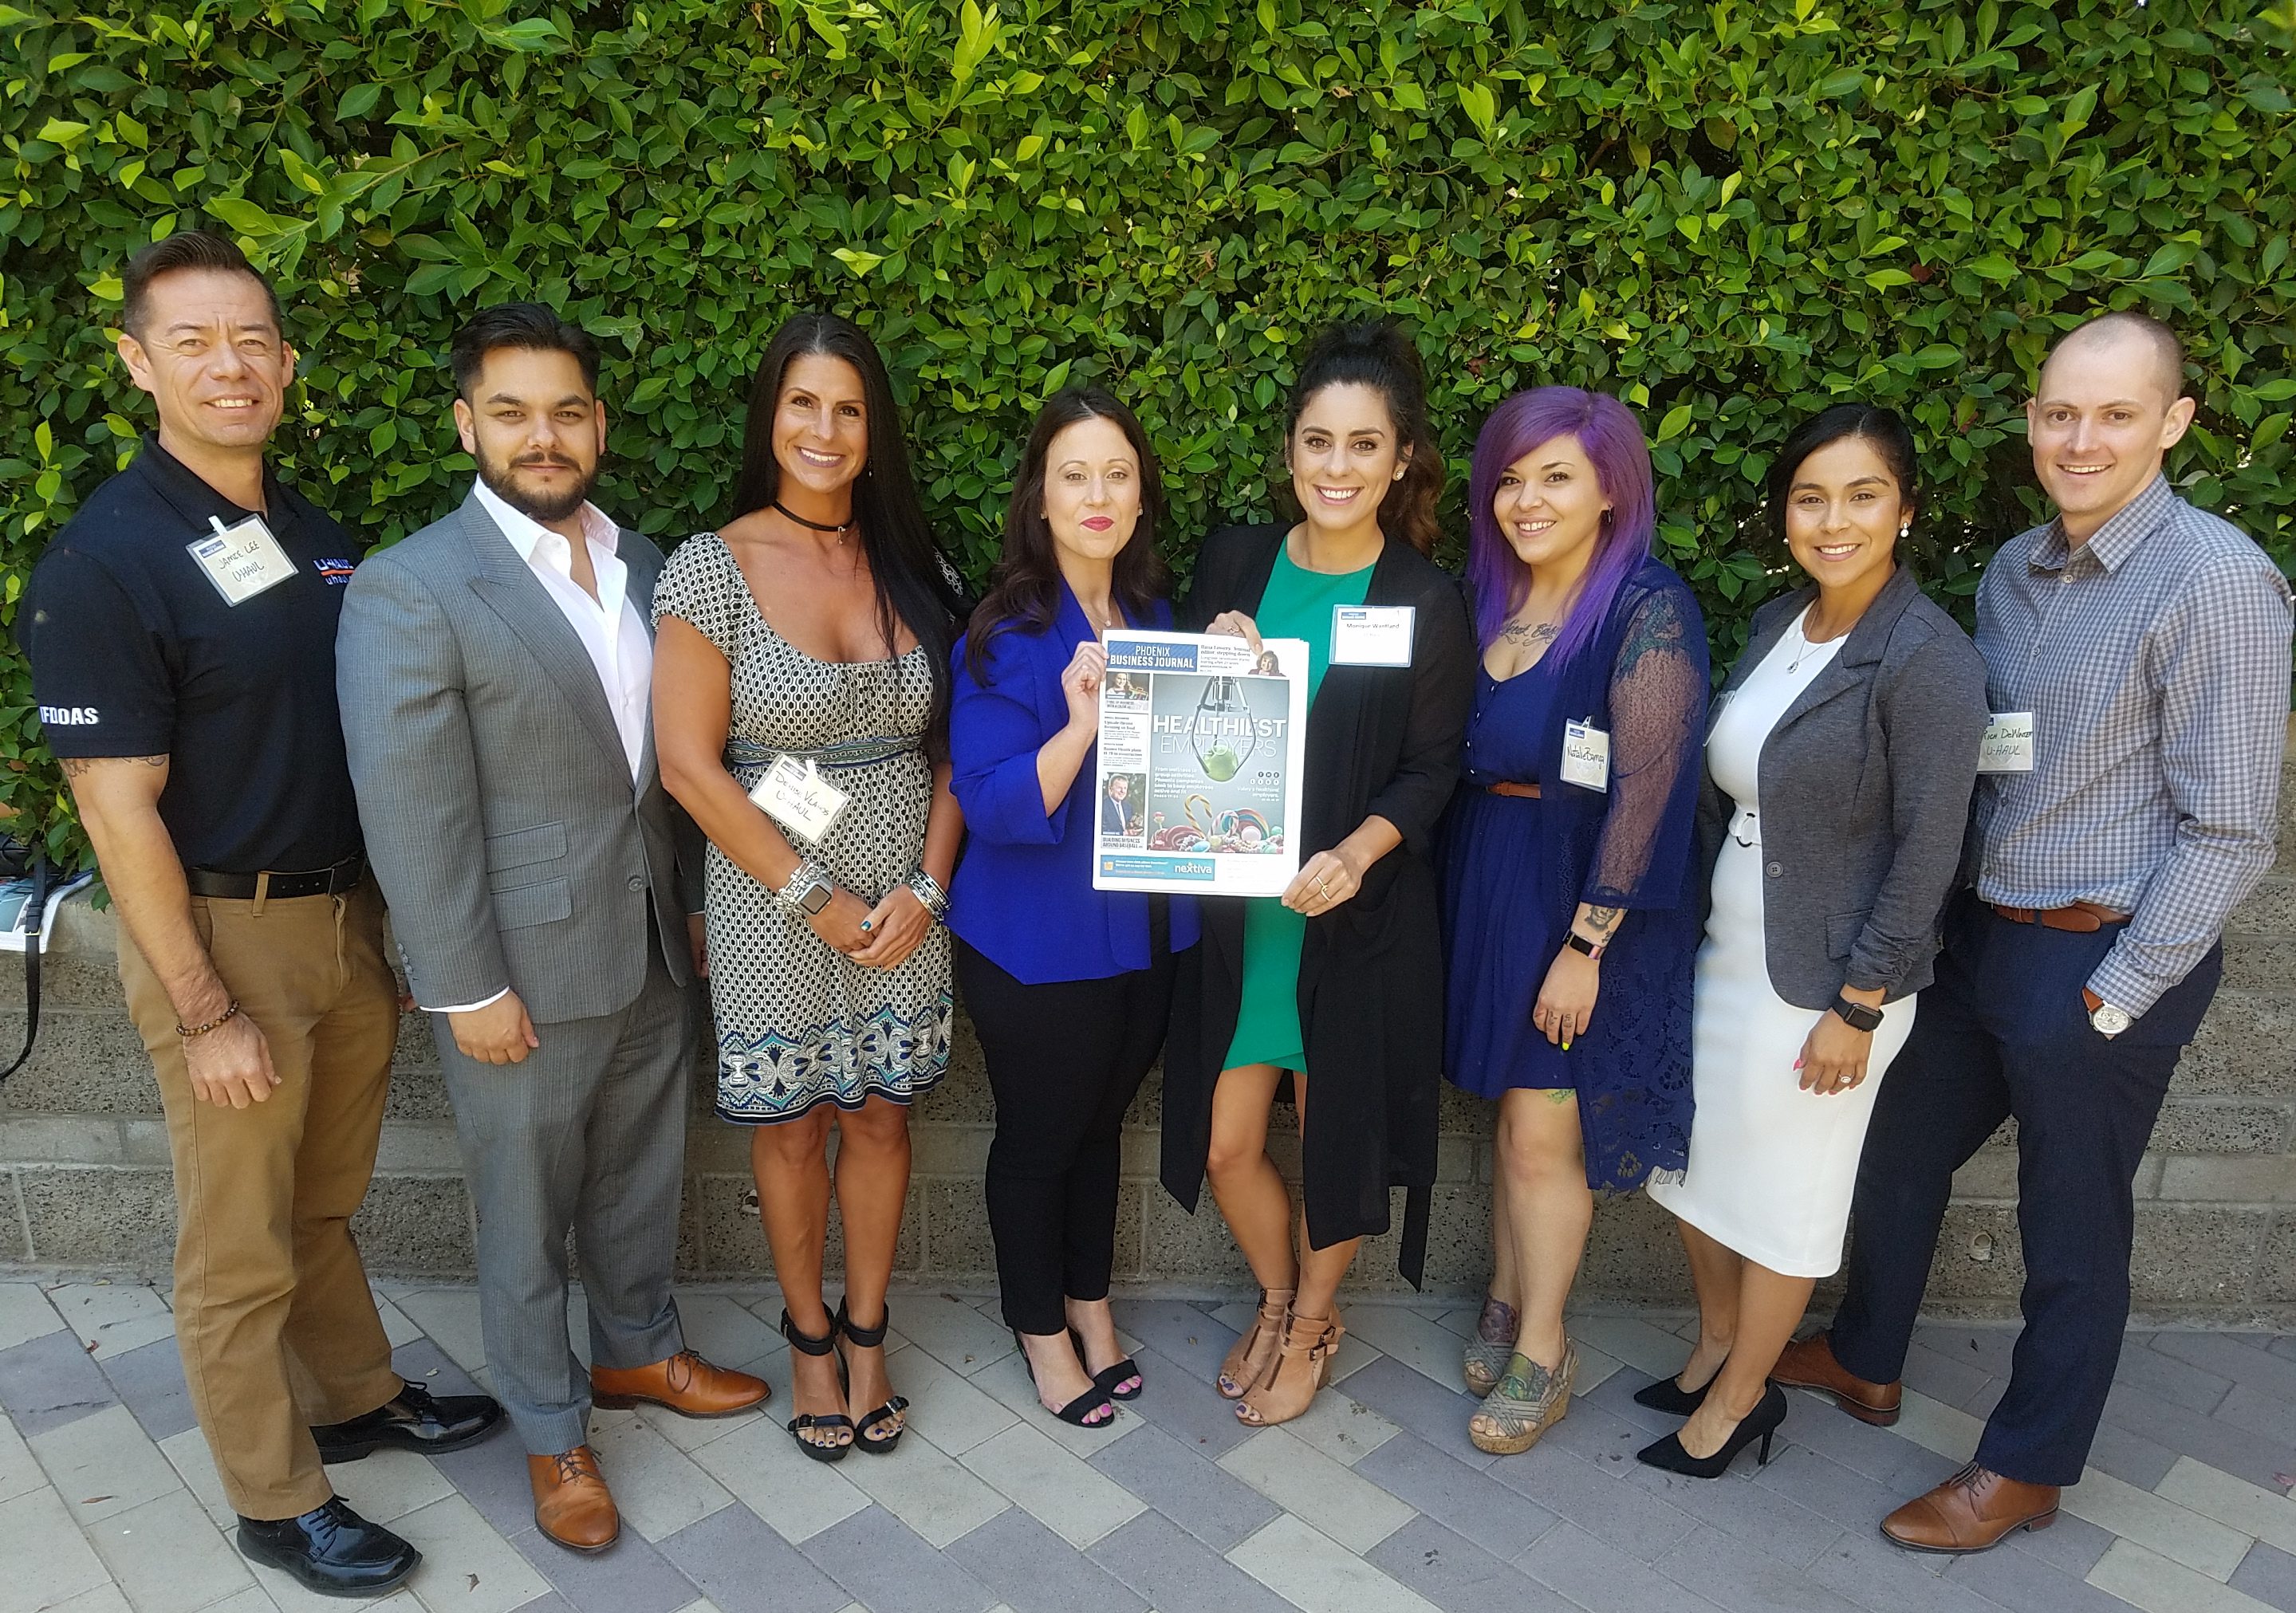 U-Haul receives The Valleys Healthiest Employers Award as a top 10 honoree in the large business category for 2018